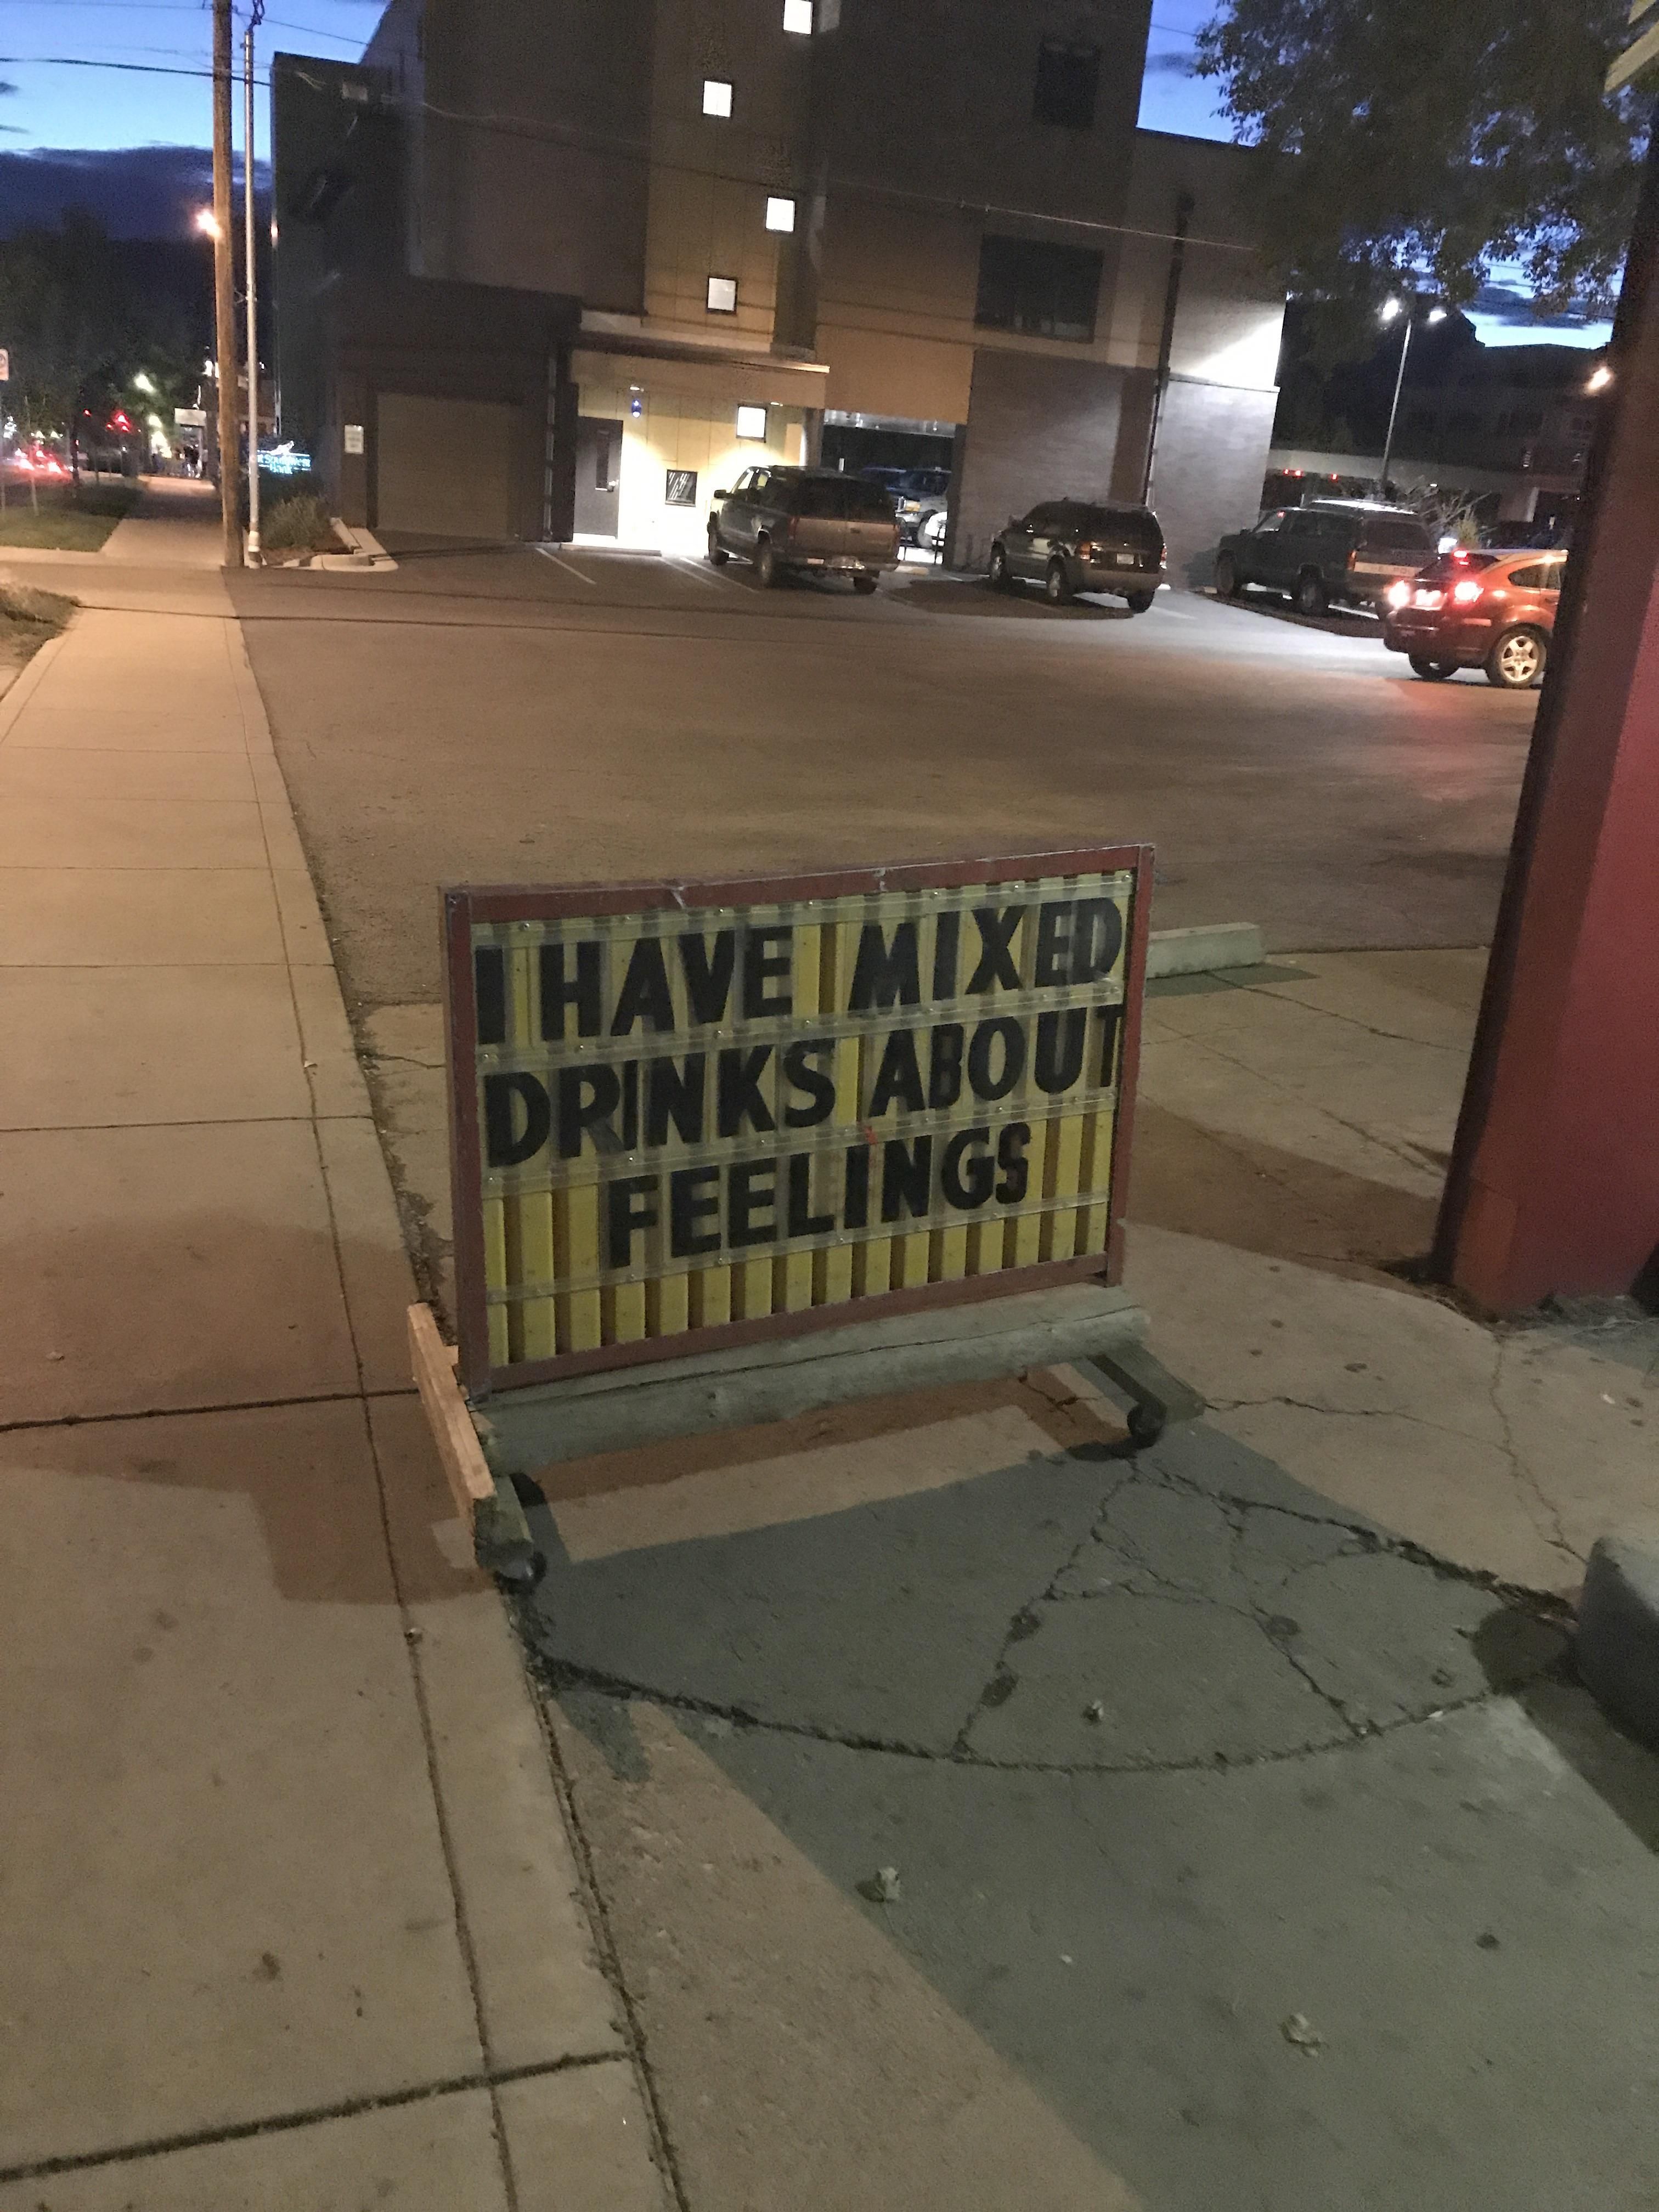 This liquor store sign in Durango, CO telling it like it is.